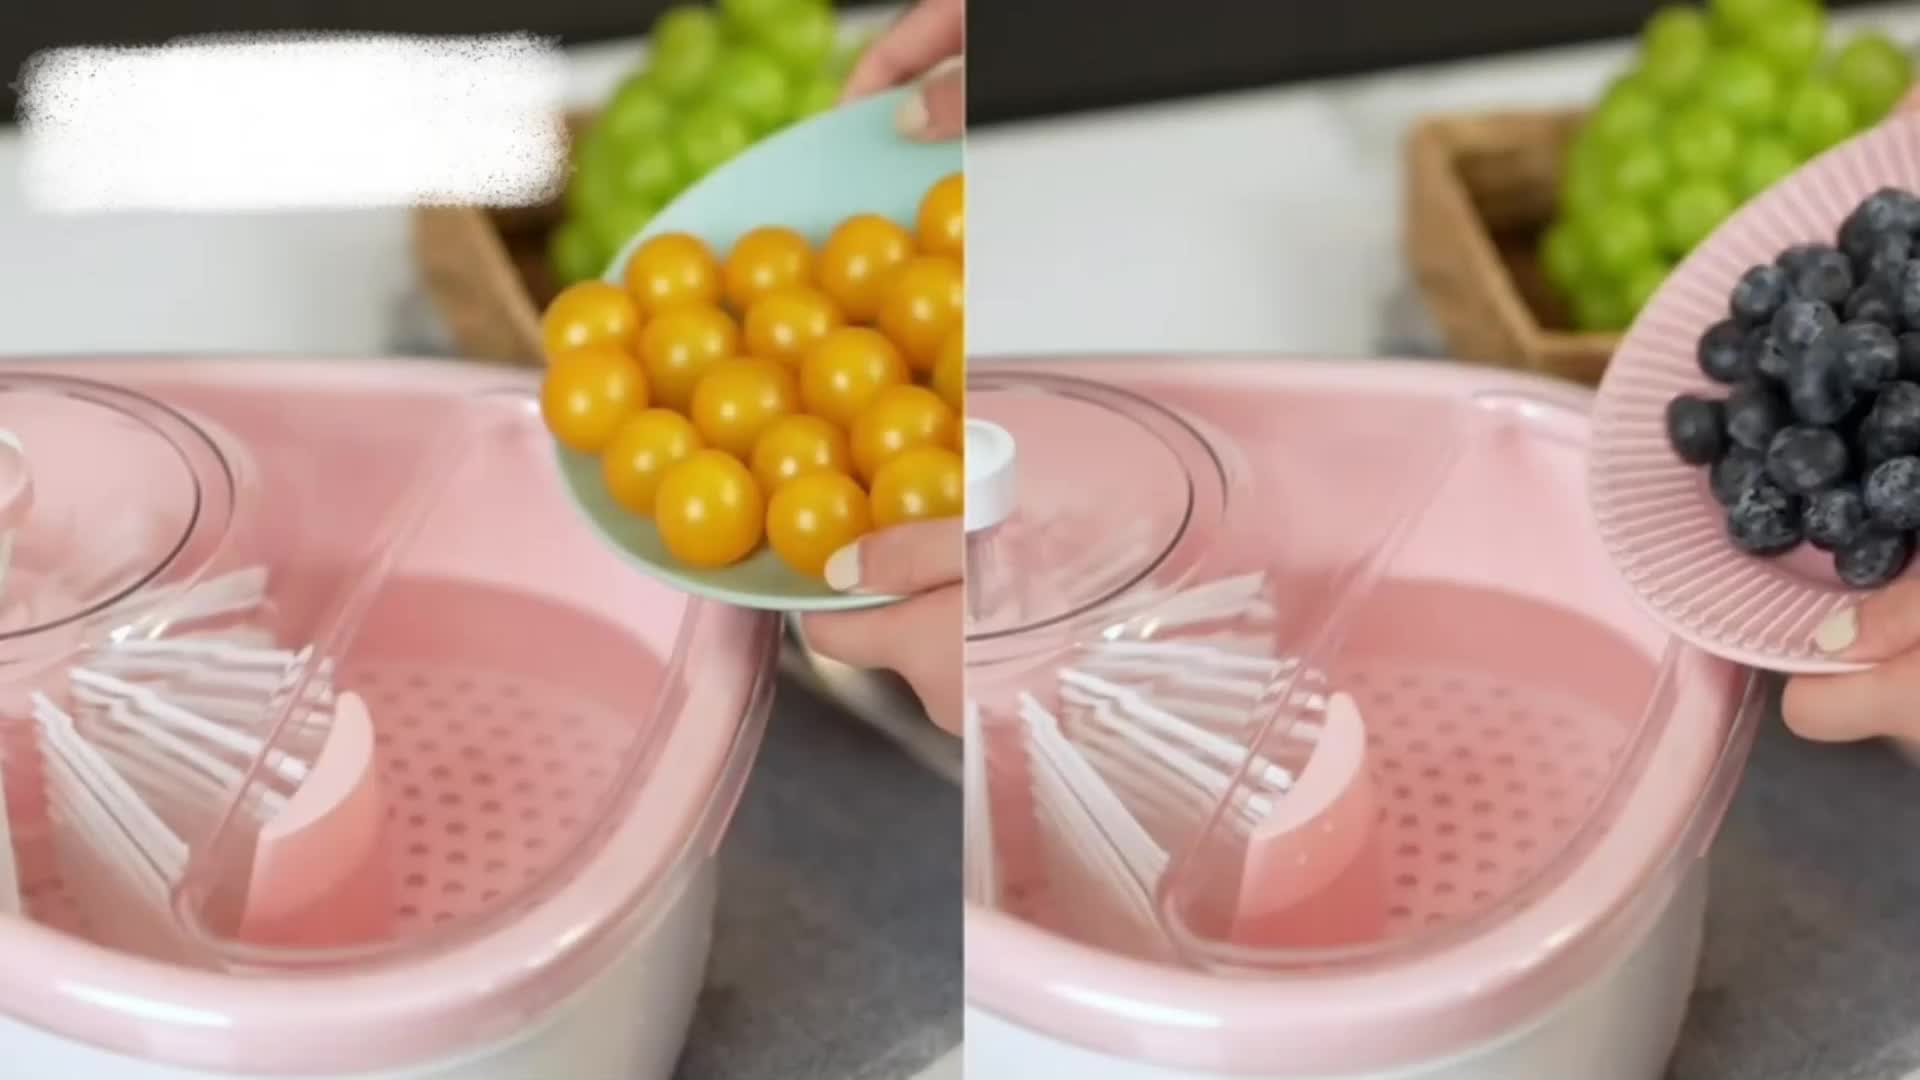 1pc, Efficient Fruit and Vegetable Washer - Spin Cleaning Machine for  Fruits and Vegetables - Manual Fruit Cleaner Device - Kitchen Tool for  Healthy